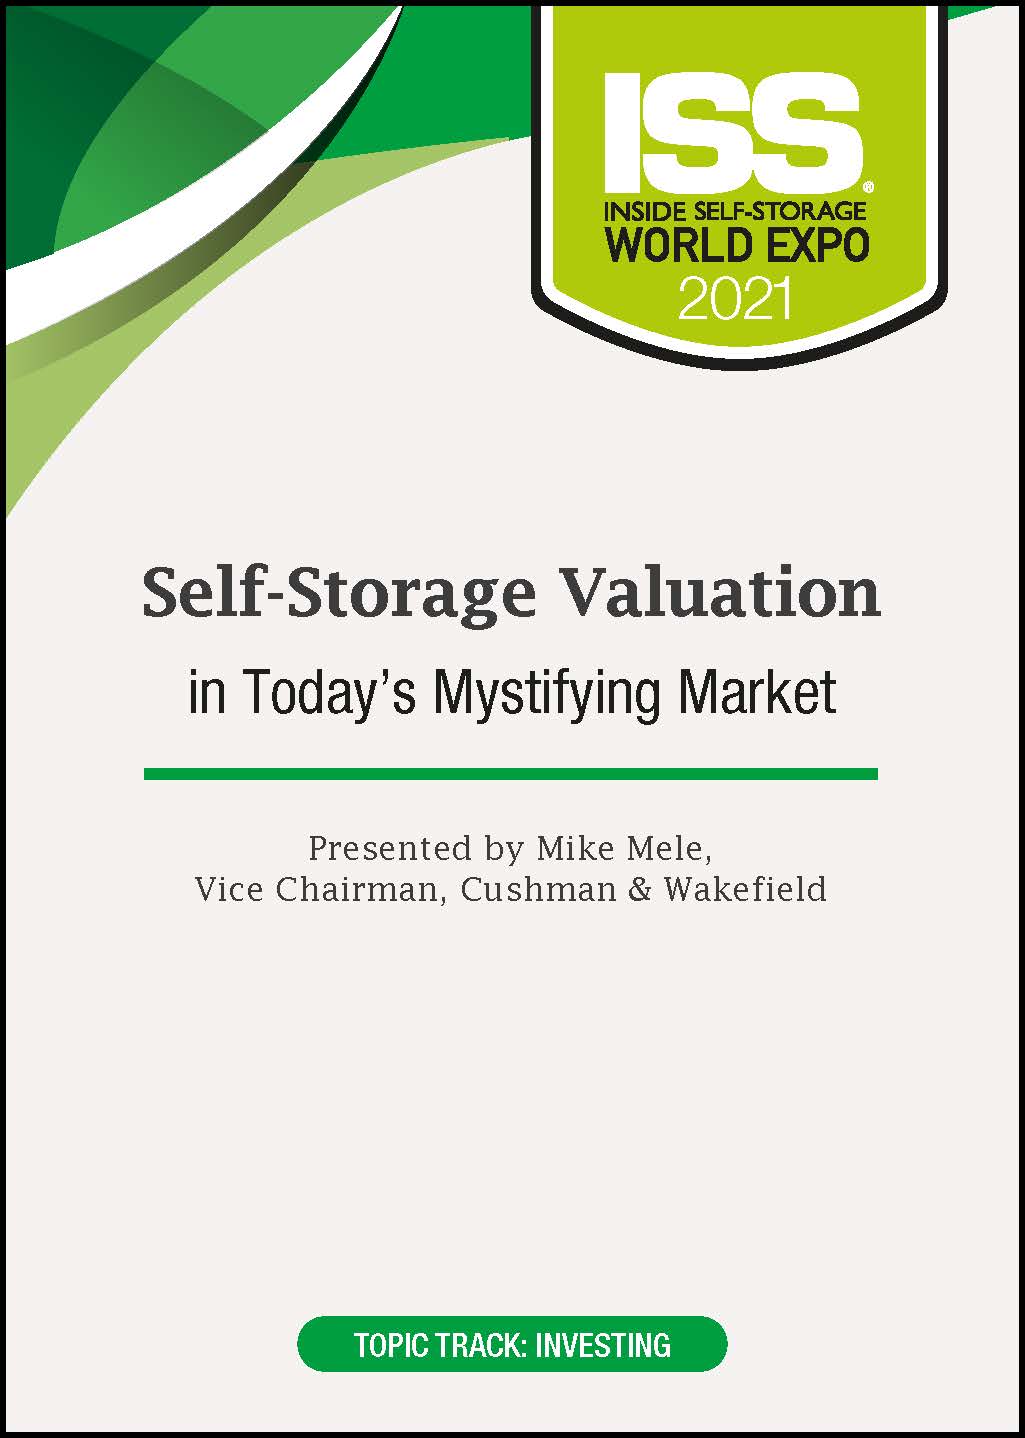 Self-Storage Valuation in Today’s Mystifying Market